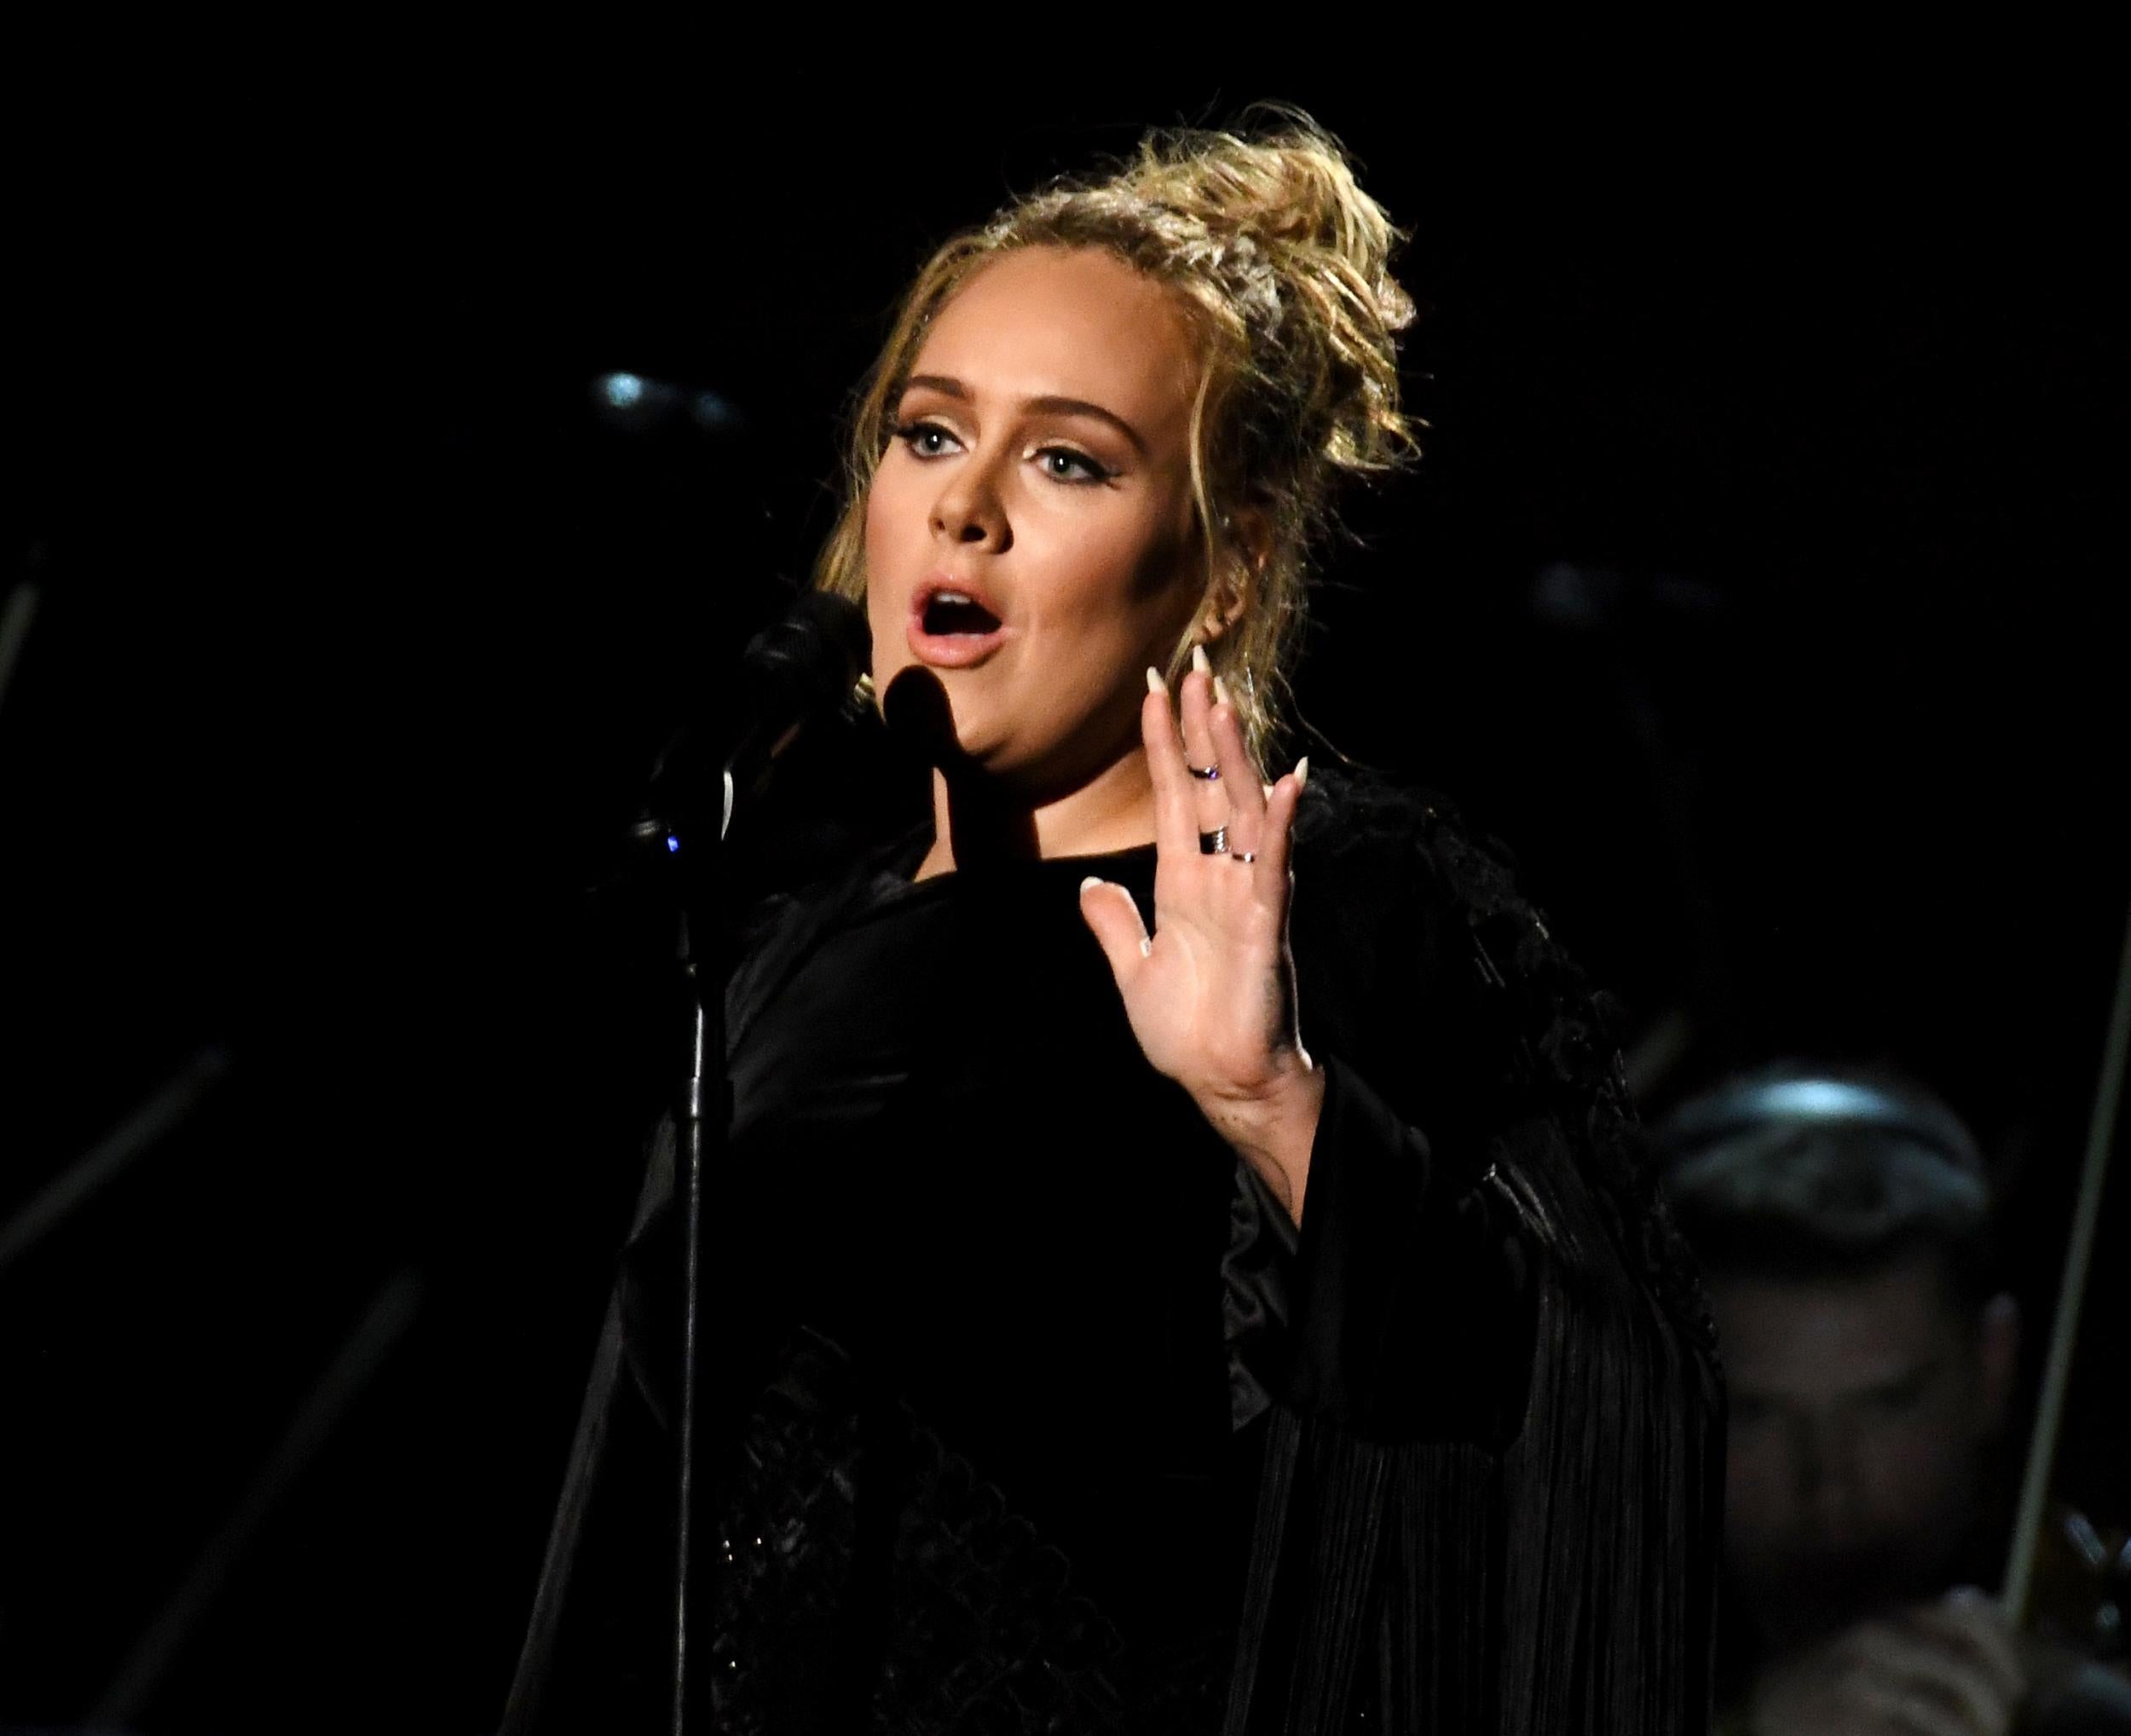 Adele has pulled out of her final two tour dates